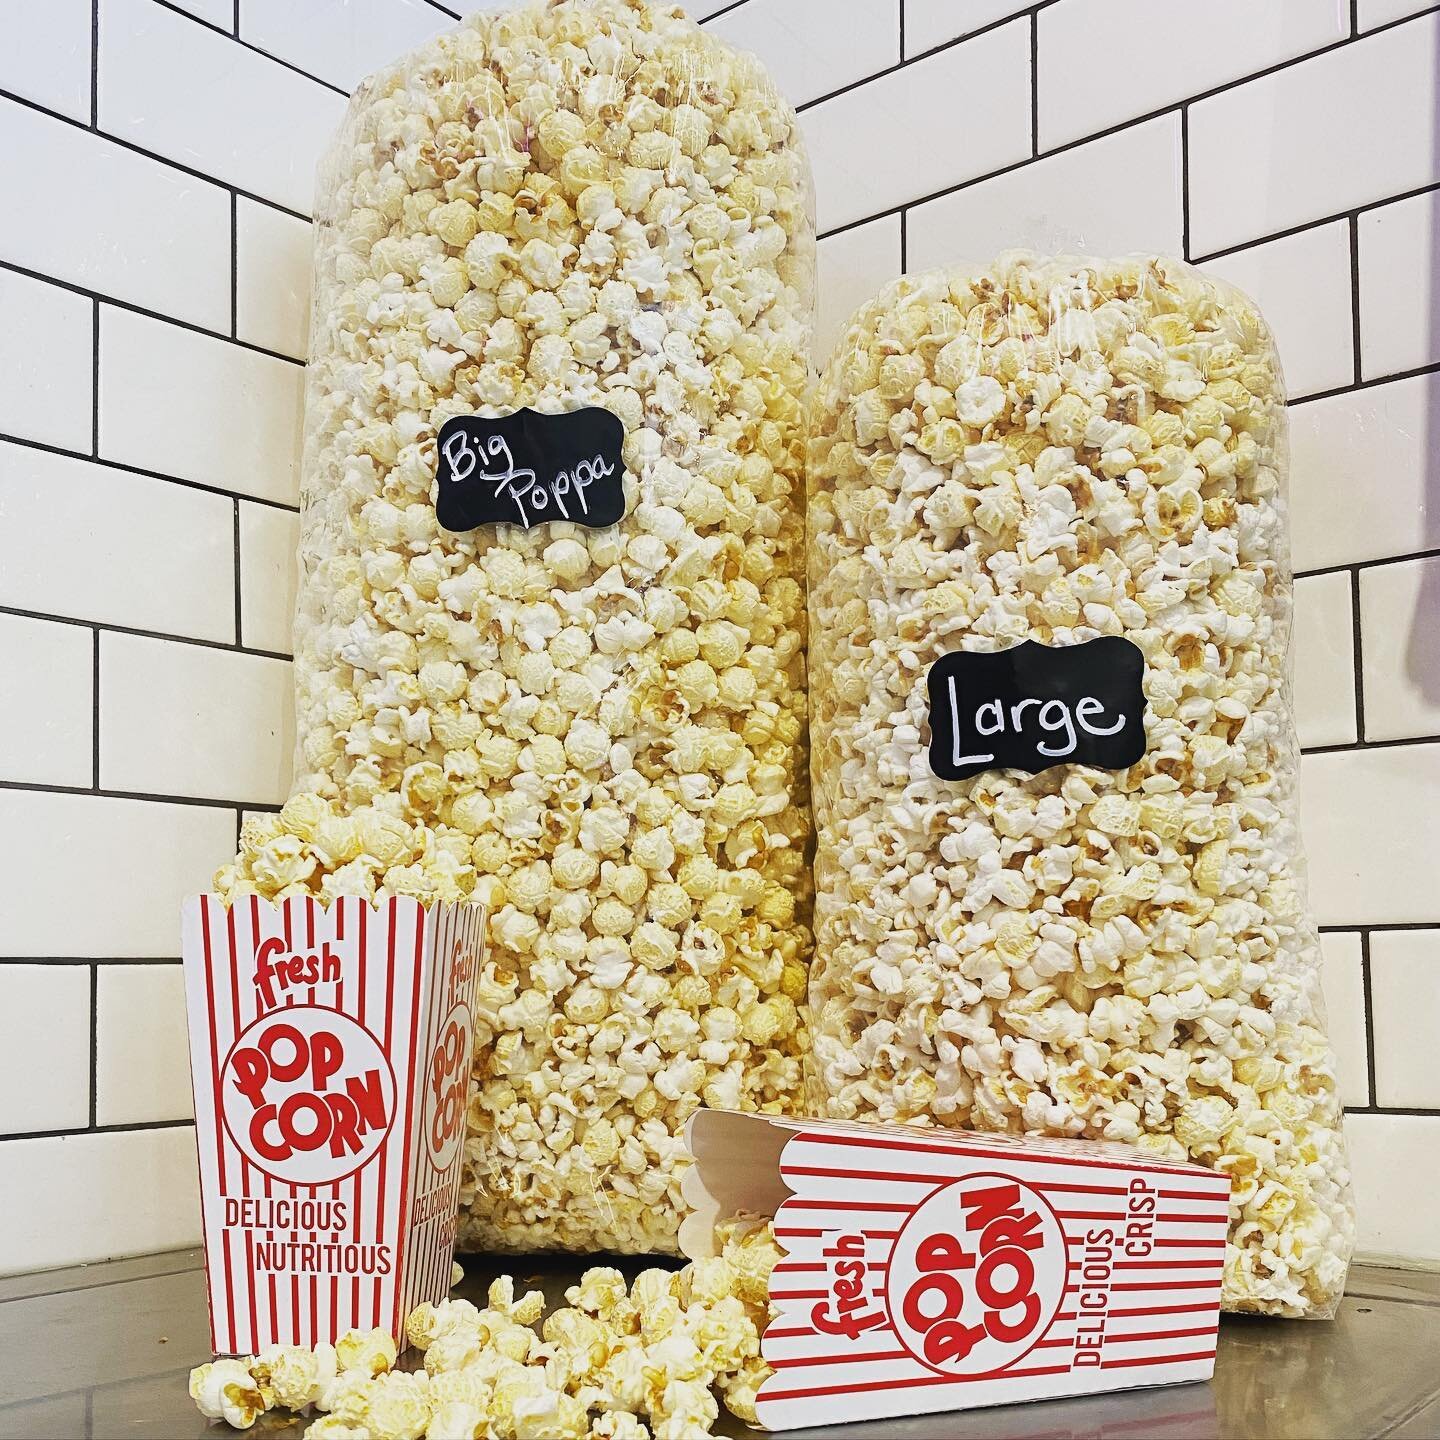 Get the fireworks started!!🎆 This weekend, large &amp; big poppa sized bags are on sale! 

Large (42 cups) $19.95!
Big Poppa (110 cups) $29.95!

Call ahead to place your order! 
651-207-4225

#remixdelights #popcorn #tonsofpopcorn #weekendvibes #sha